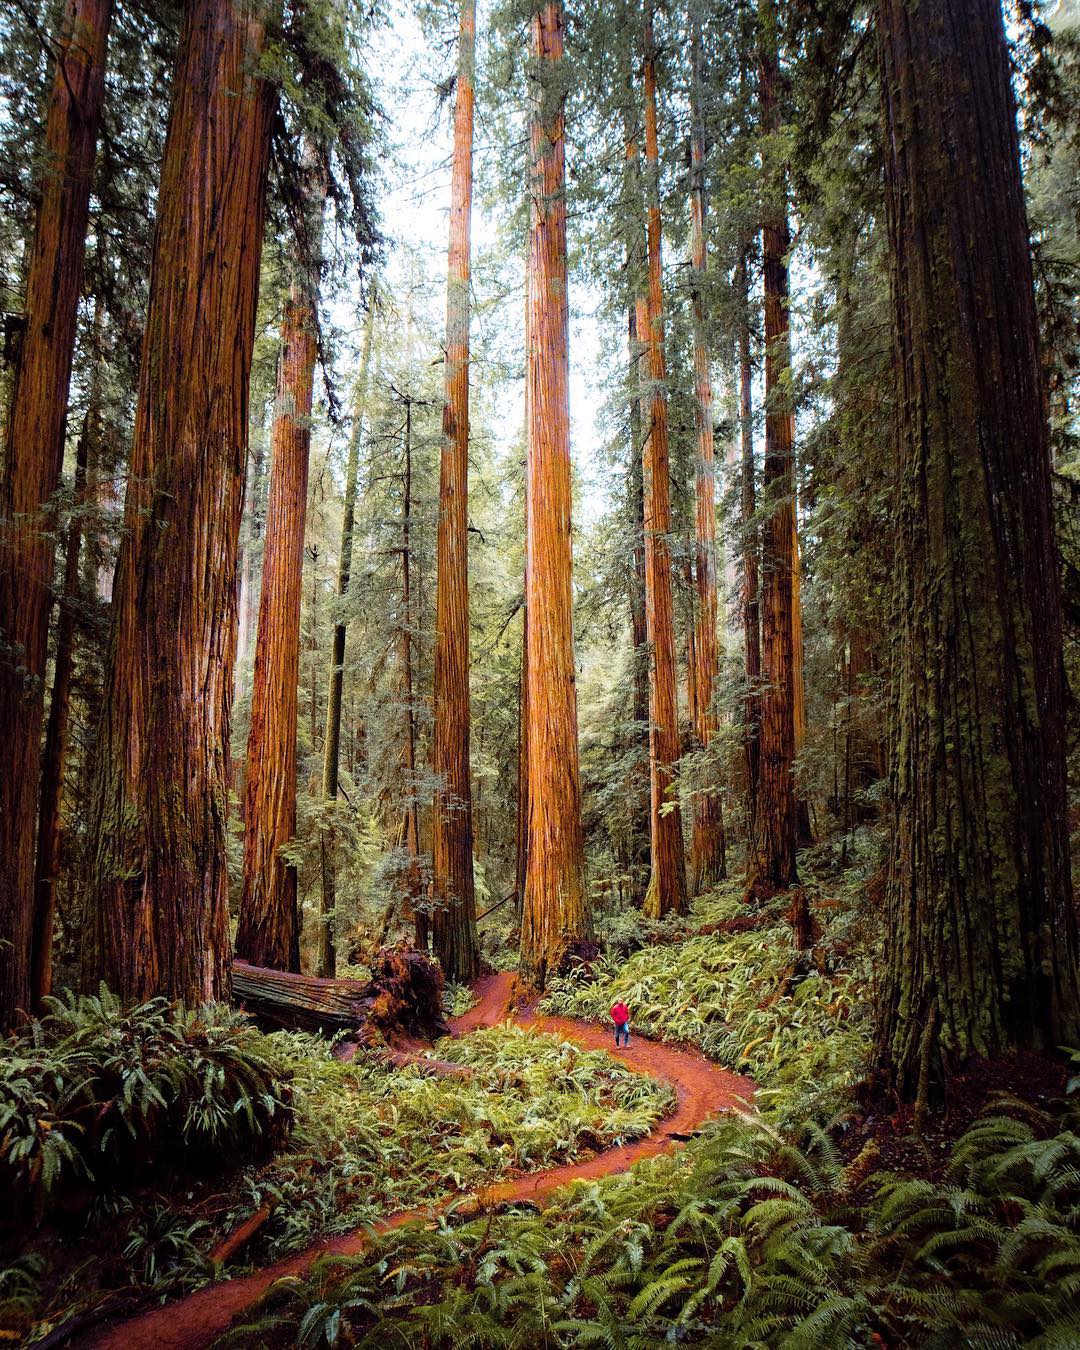 I'm incredibly biased, but the most beautiful place is the California redwoods. Drive up 101, and then detour towards Petrolia. There is absolutely nothing like it. Roll down your windows and drive 35mph. Smell the old growth. Stop at the pull-out. Take a small hike. It's worth it.